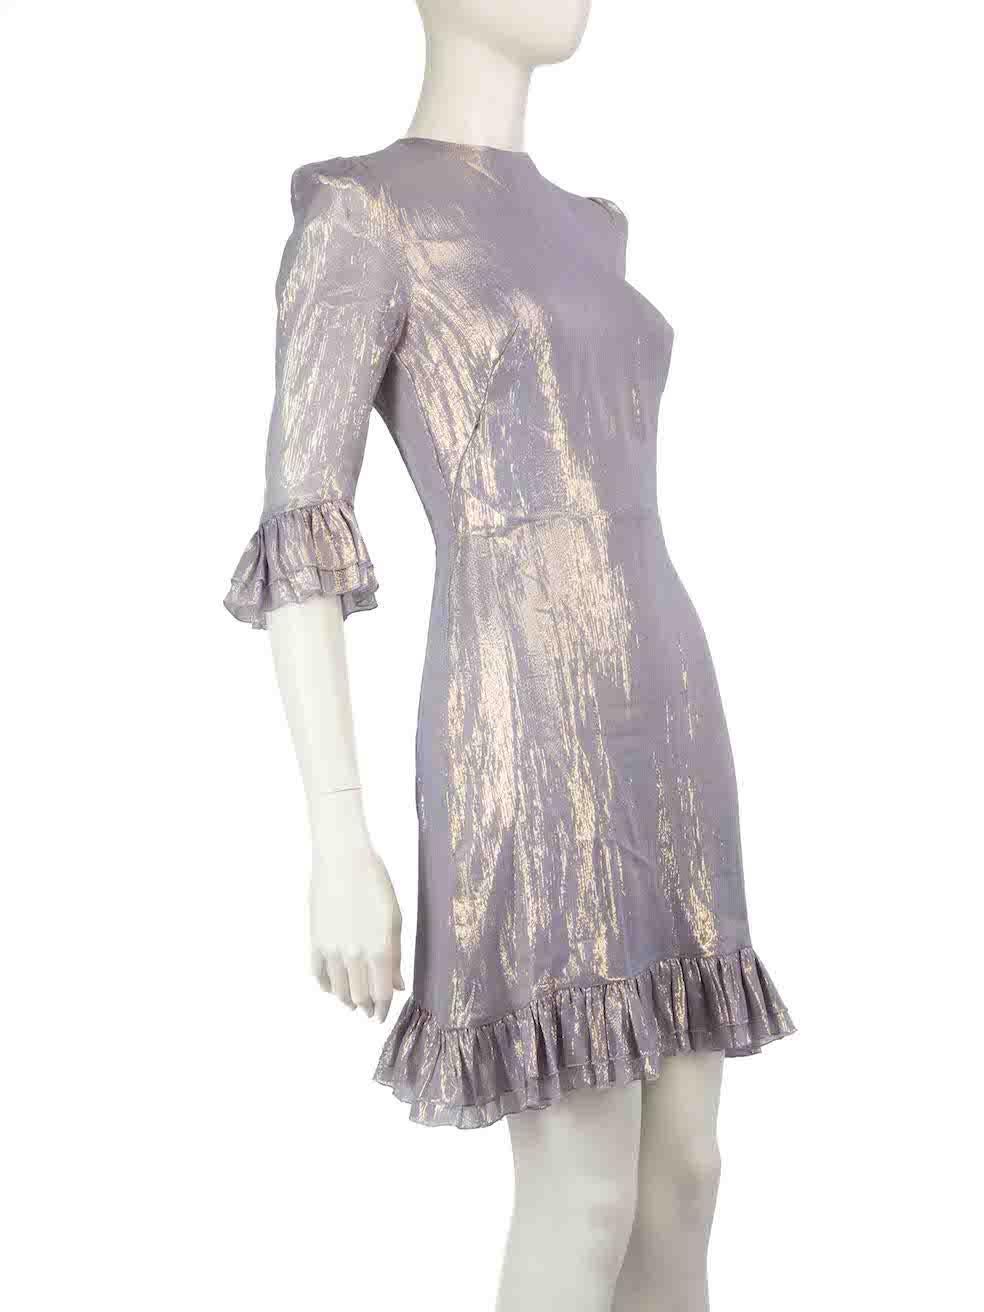 CONDITION is Good. Minor wear to dress is evident. Light wear to the front near the right bust is seen with pulls to the weave leading to a tear on this used The Vampire's Wife designer resale item.
 
 
 
 Details
 
 
 Lilac
 
 Silk
 
 Dress
 
